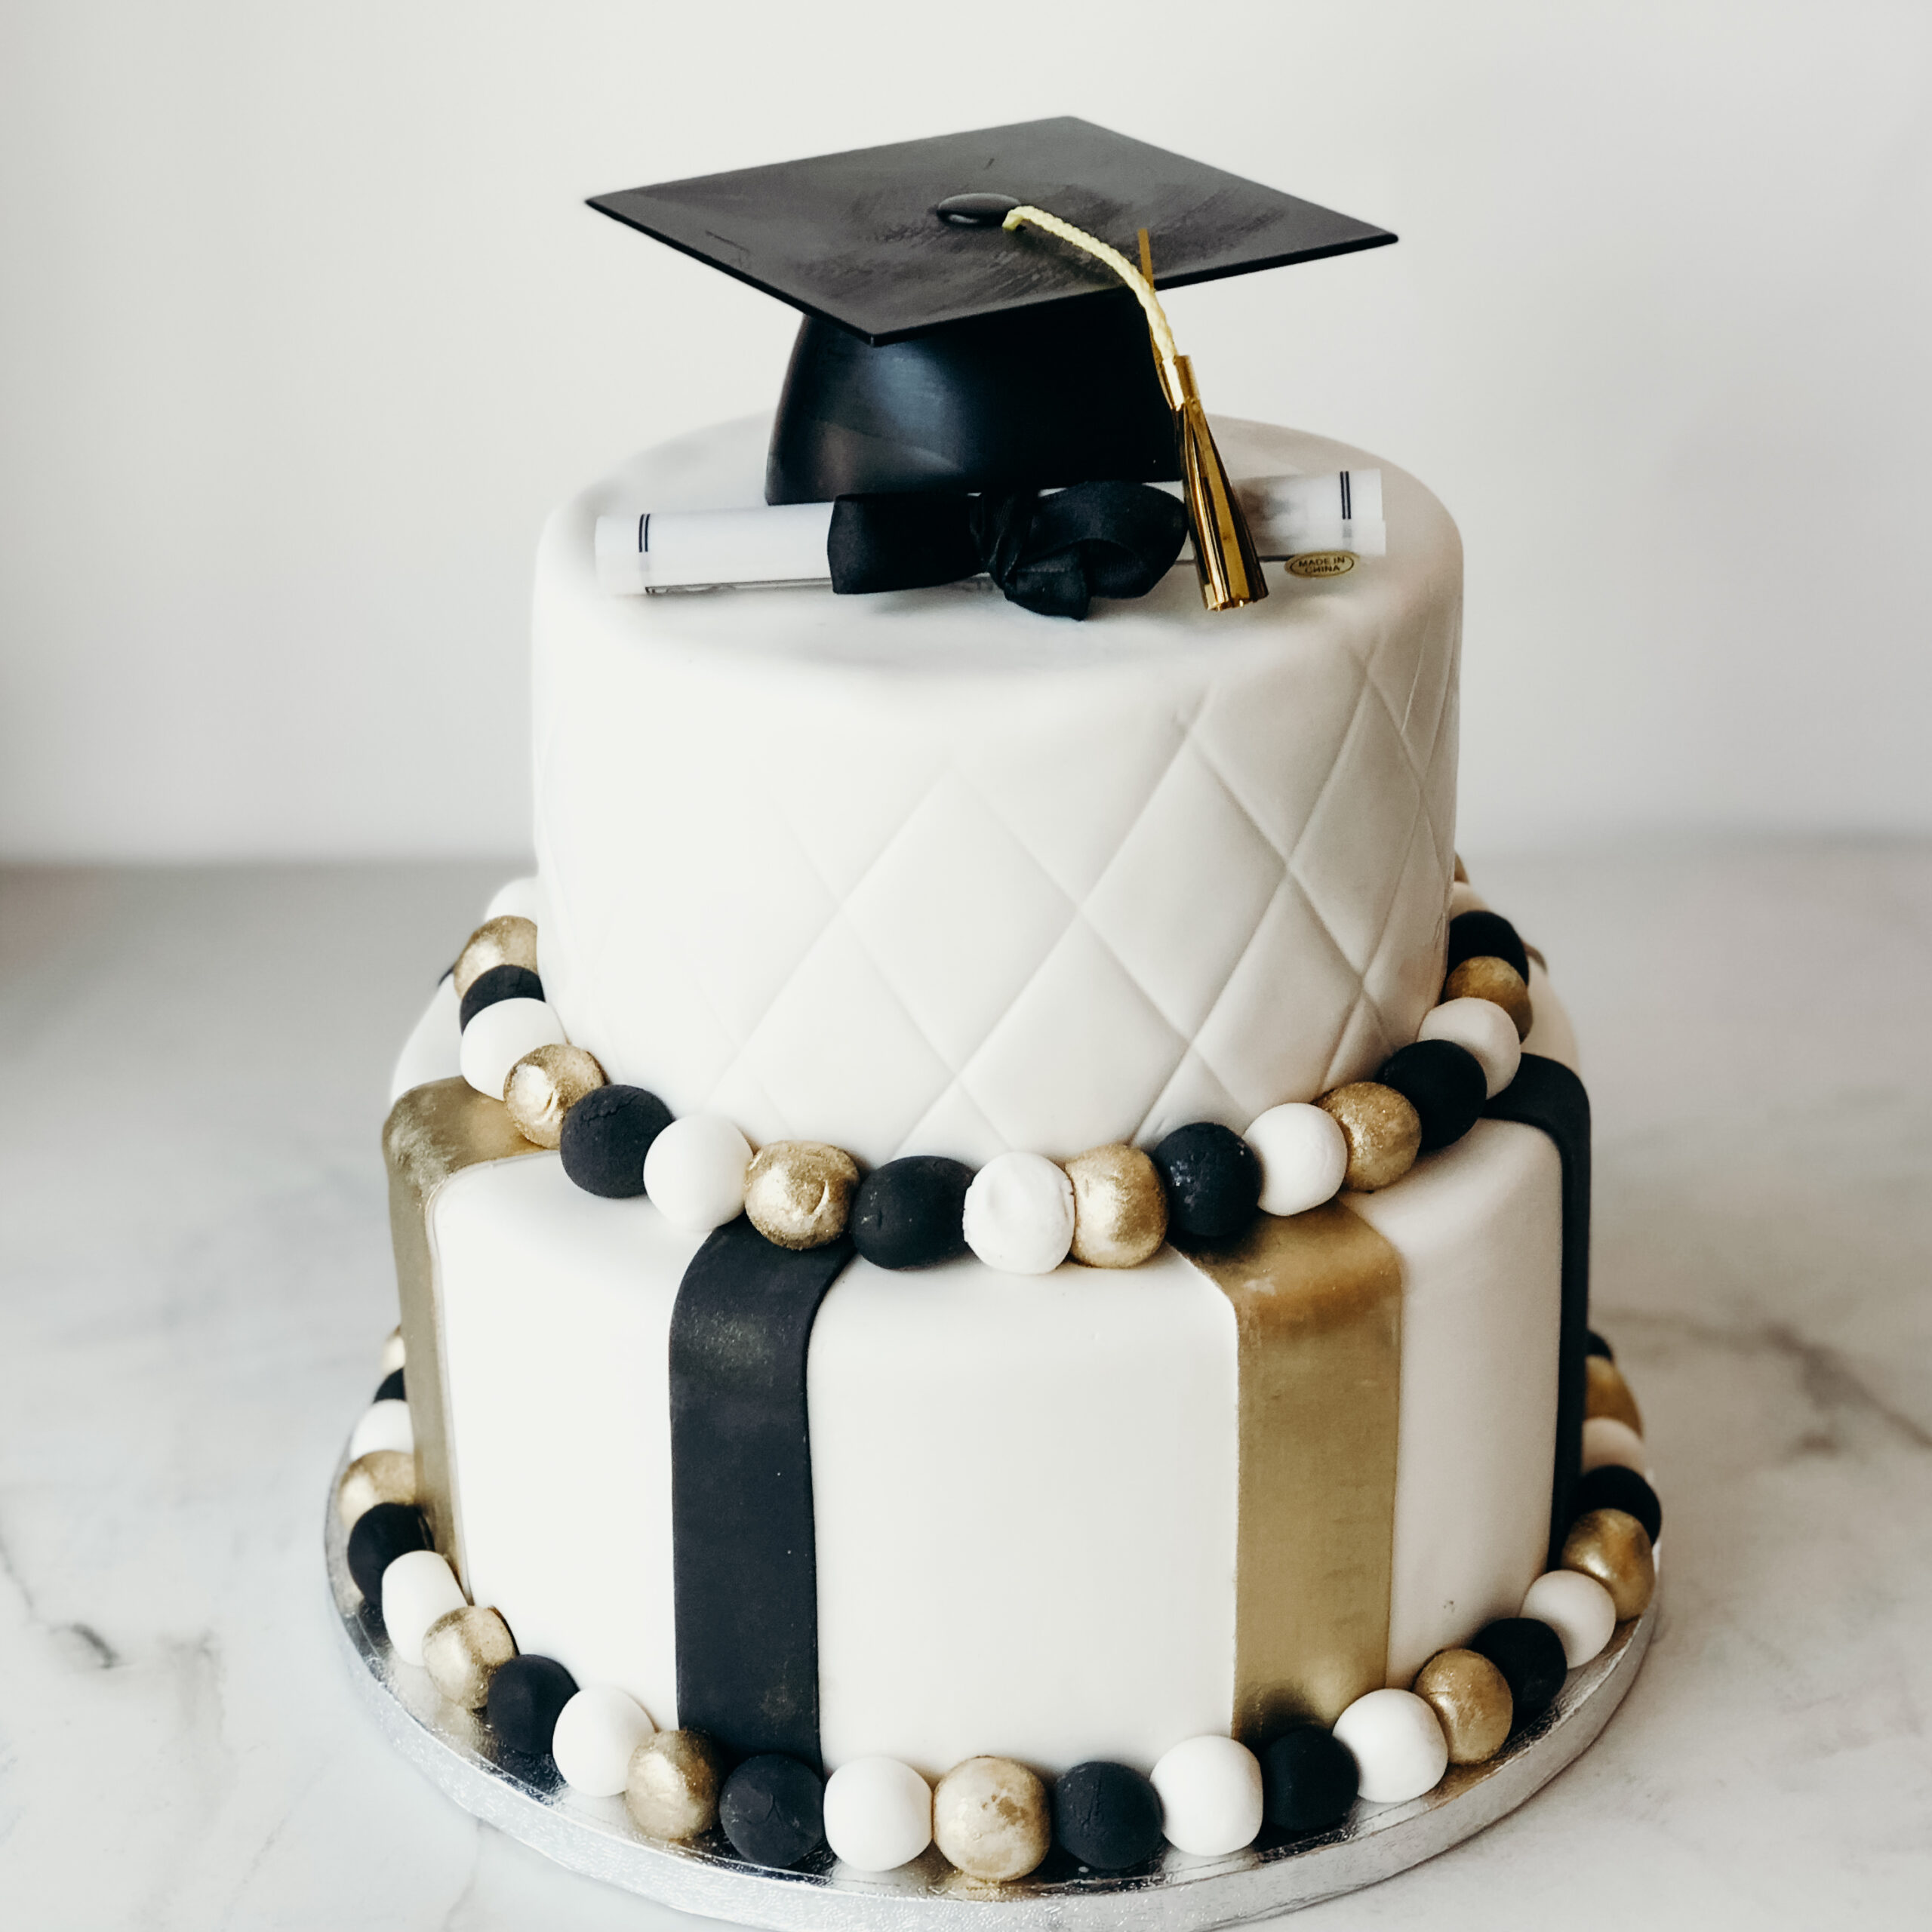 Black And Gold Birthday Cake Ideas/Black And Gold Cake/Birthday Cake/Black  Cake Designs Ideas 2022 